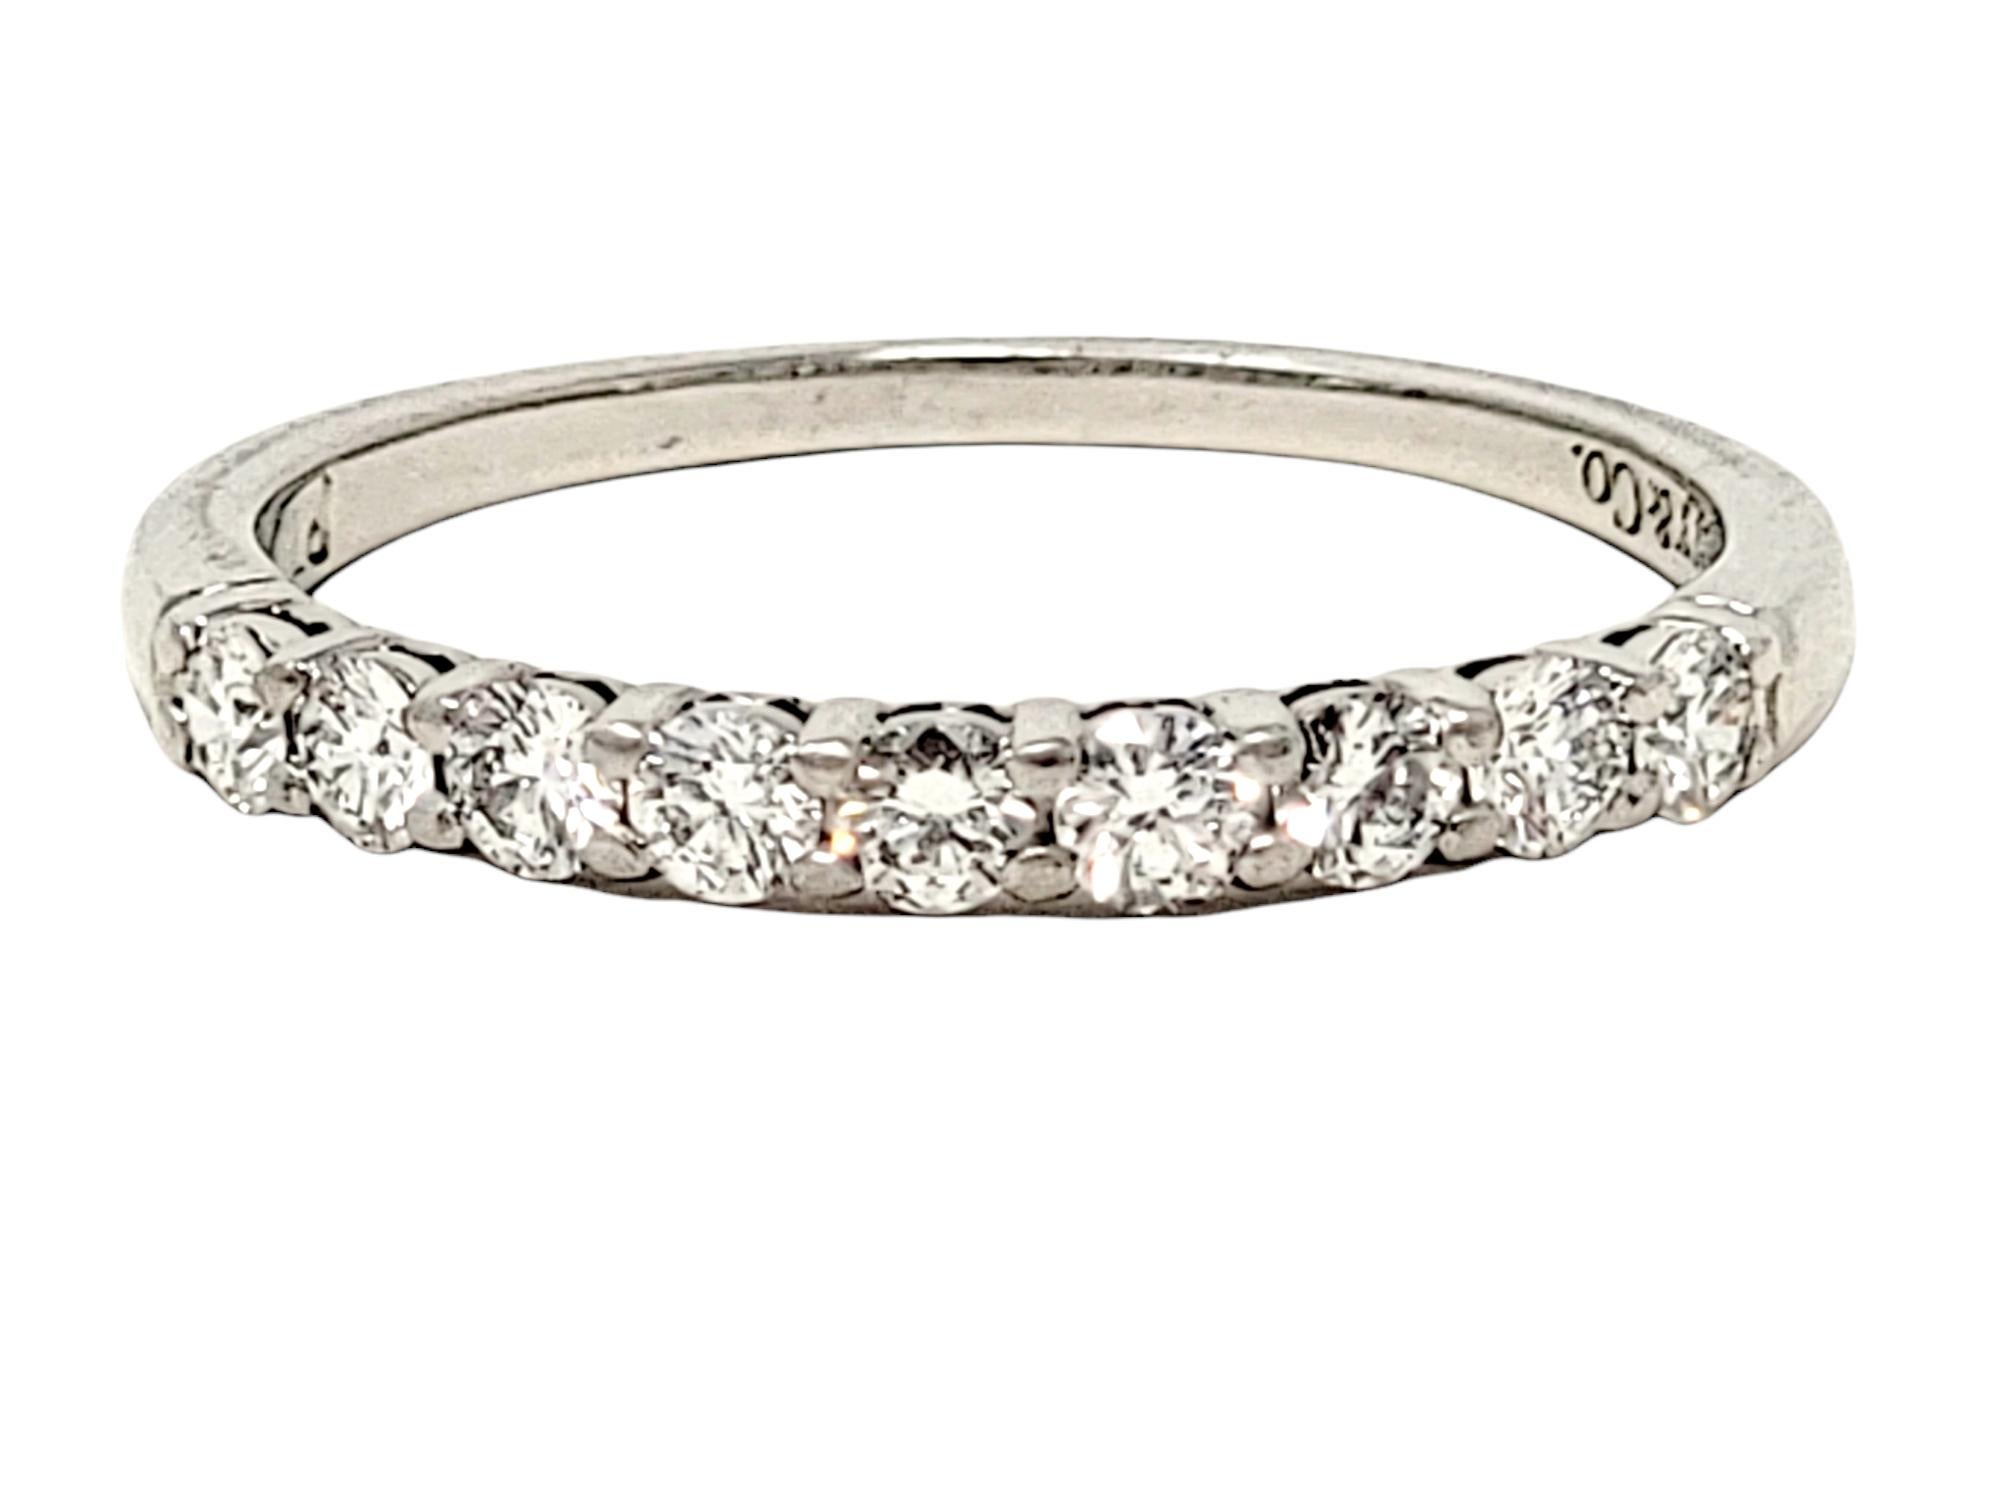 Ring size: 4.5

Stunning Tiffany & Co. diamond 'Embrace' band ring. This timeless beauty features icy white round diamonds prong set along the top half of the ring in a single elegant row. It would be perfect paired with an engagement ring, or